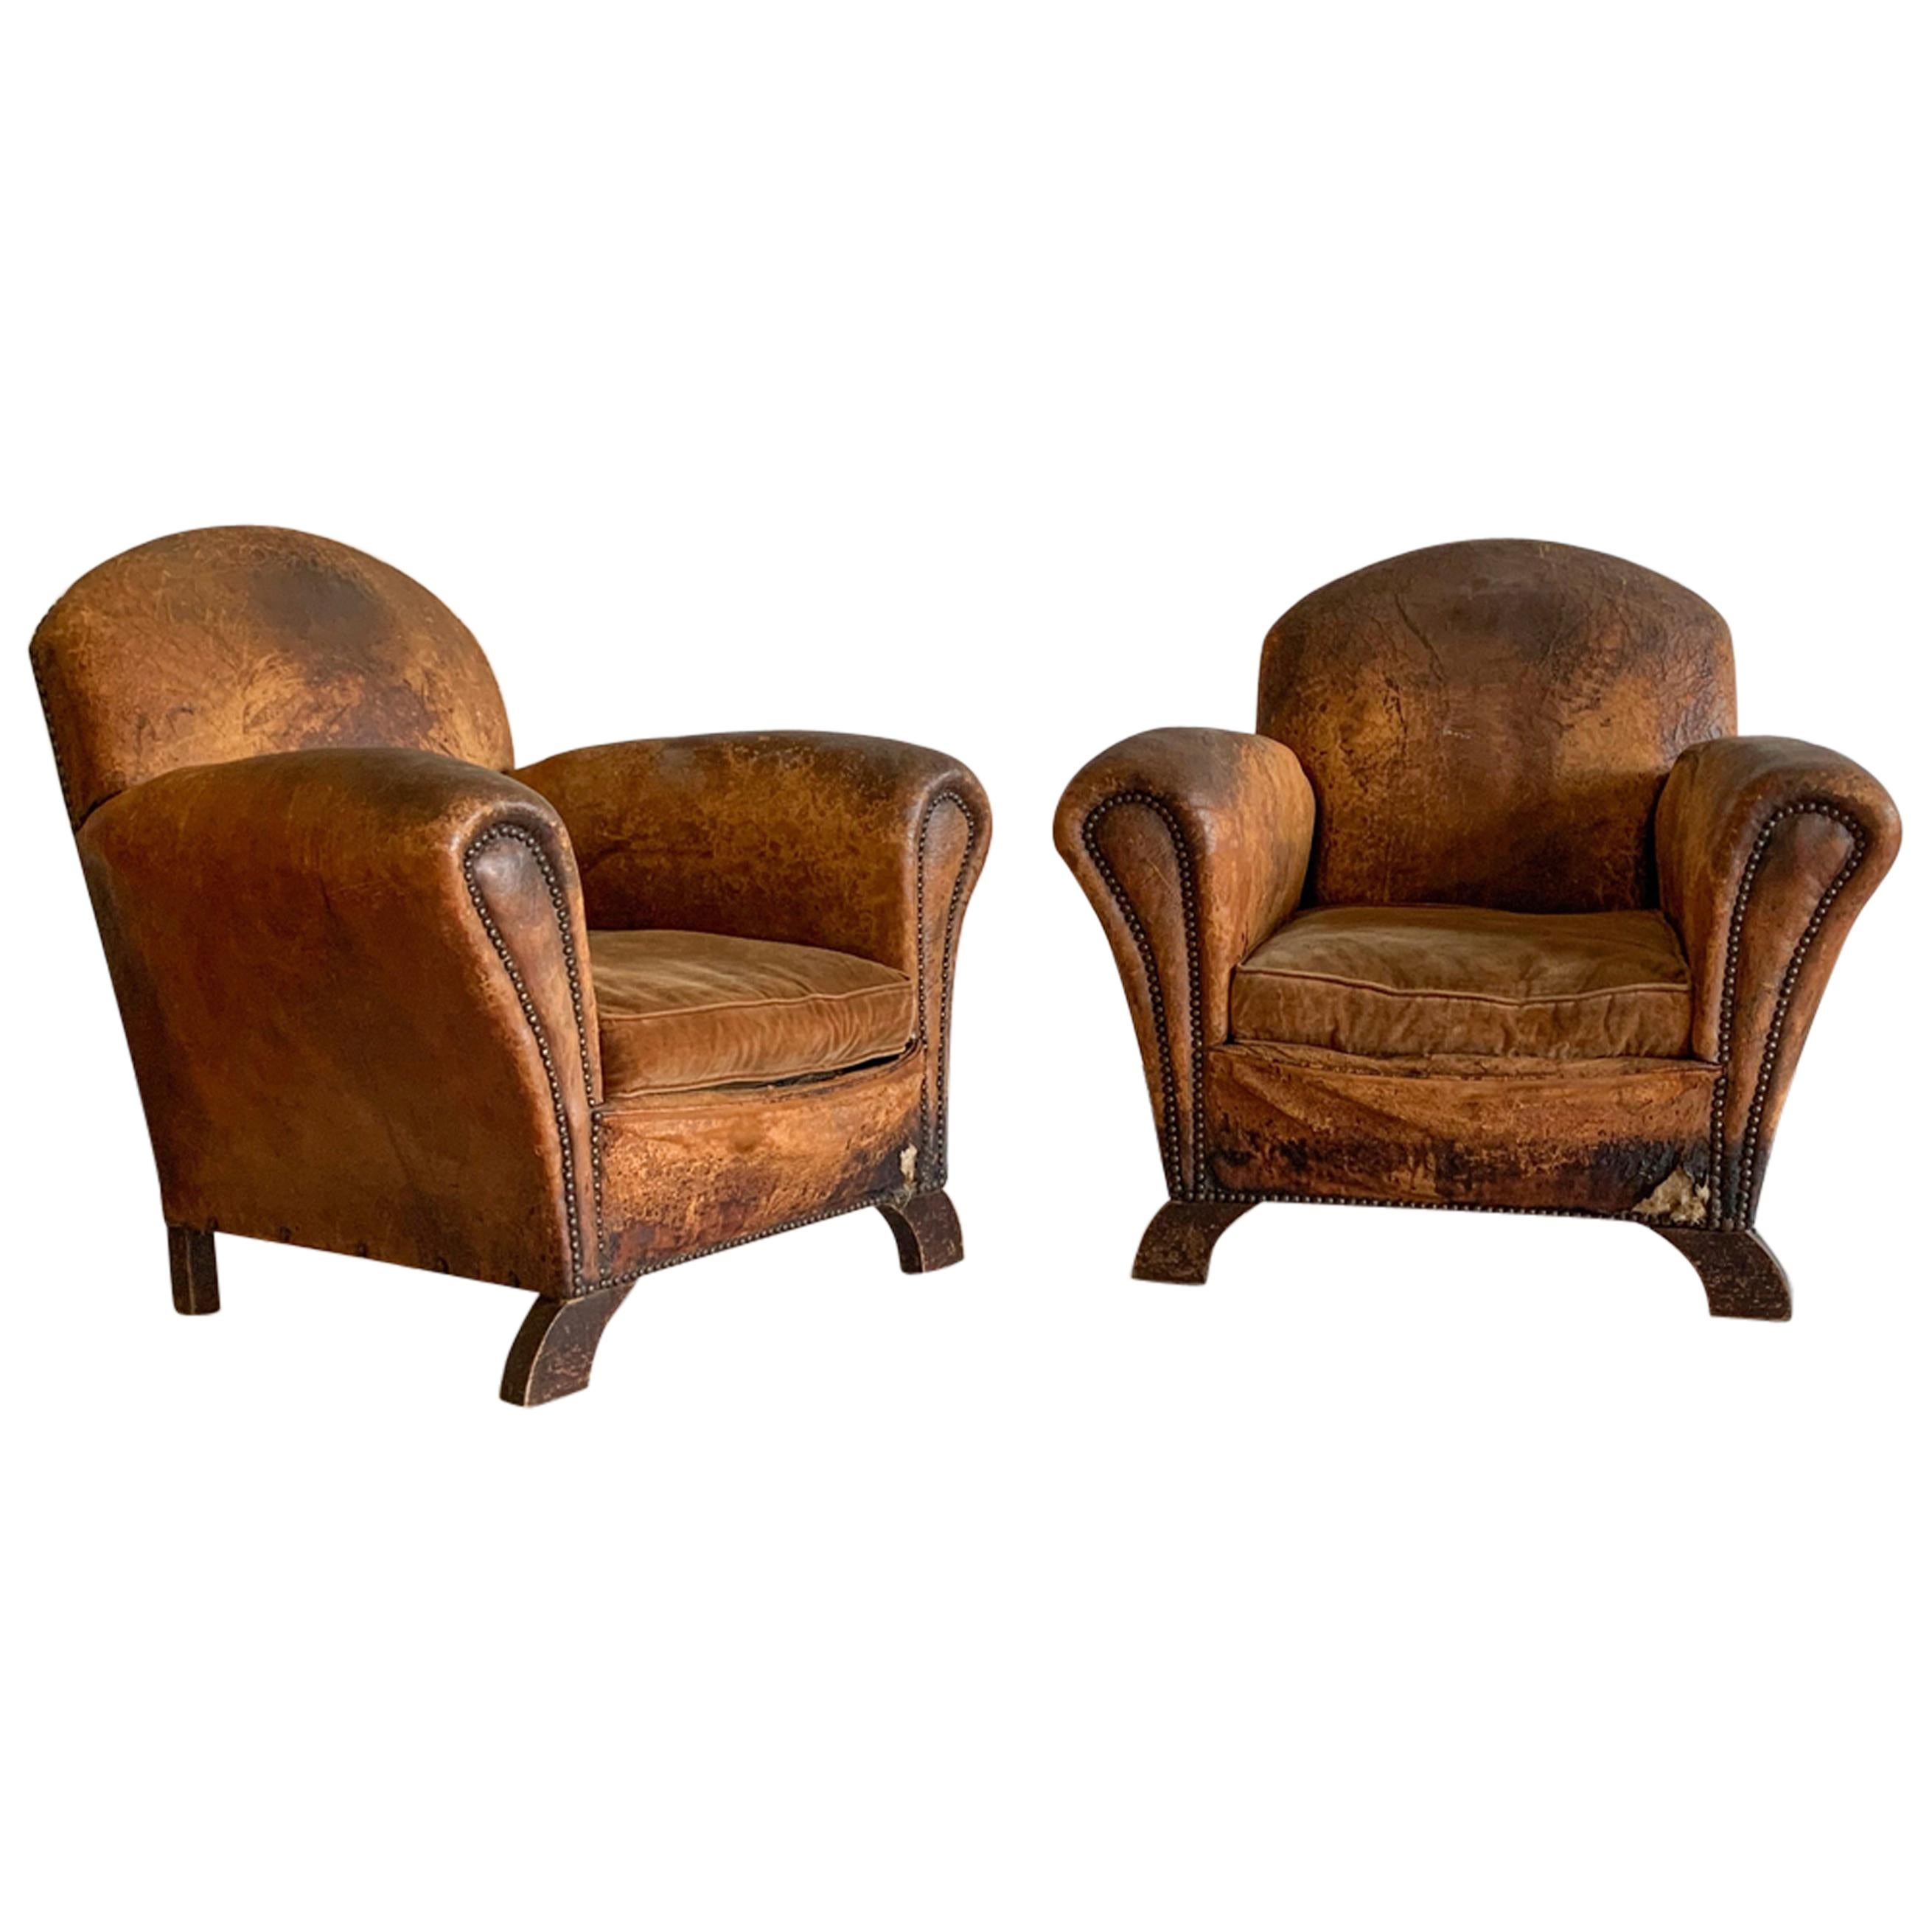 Distressed French Art Deco Leather Club Chairs, a Pair